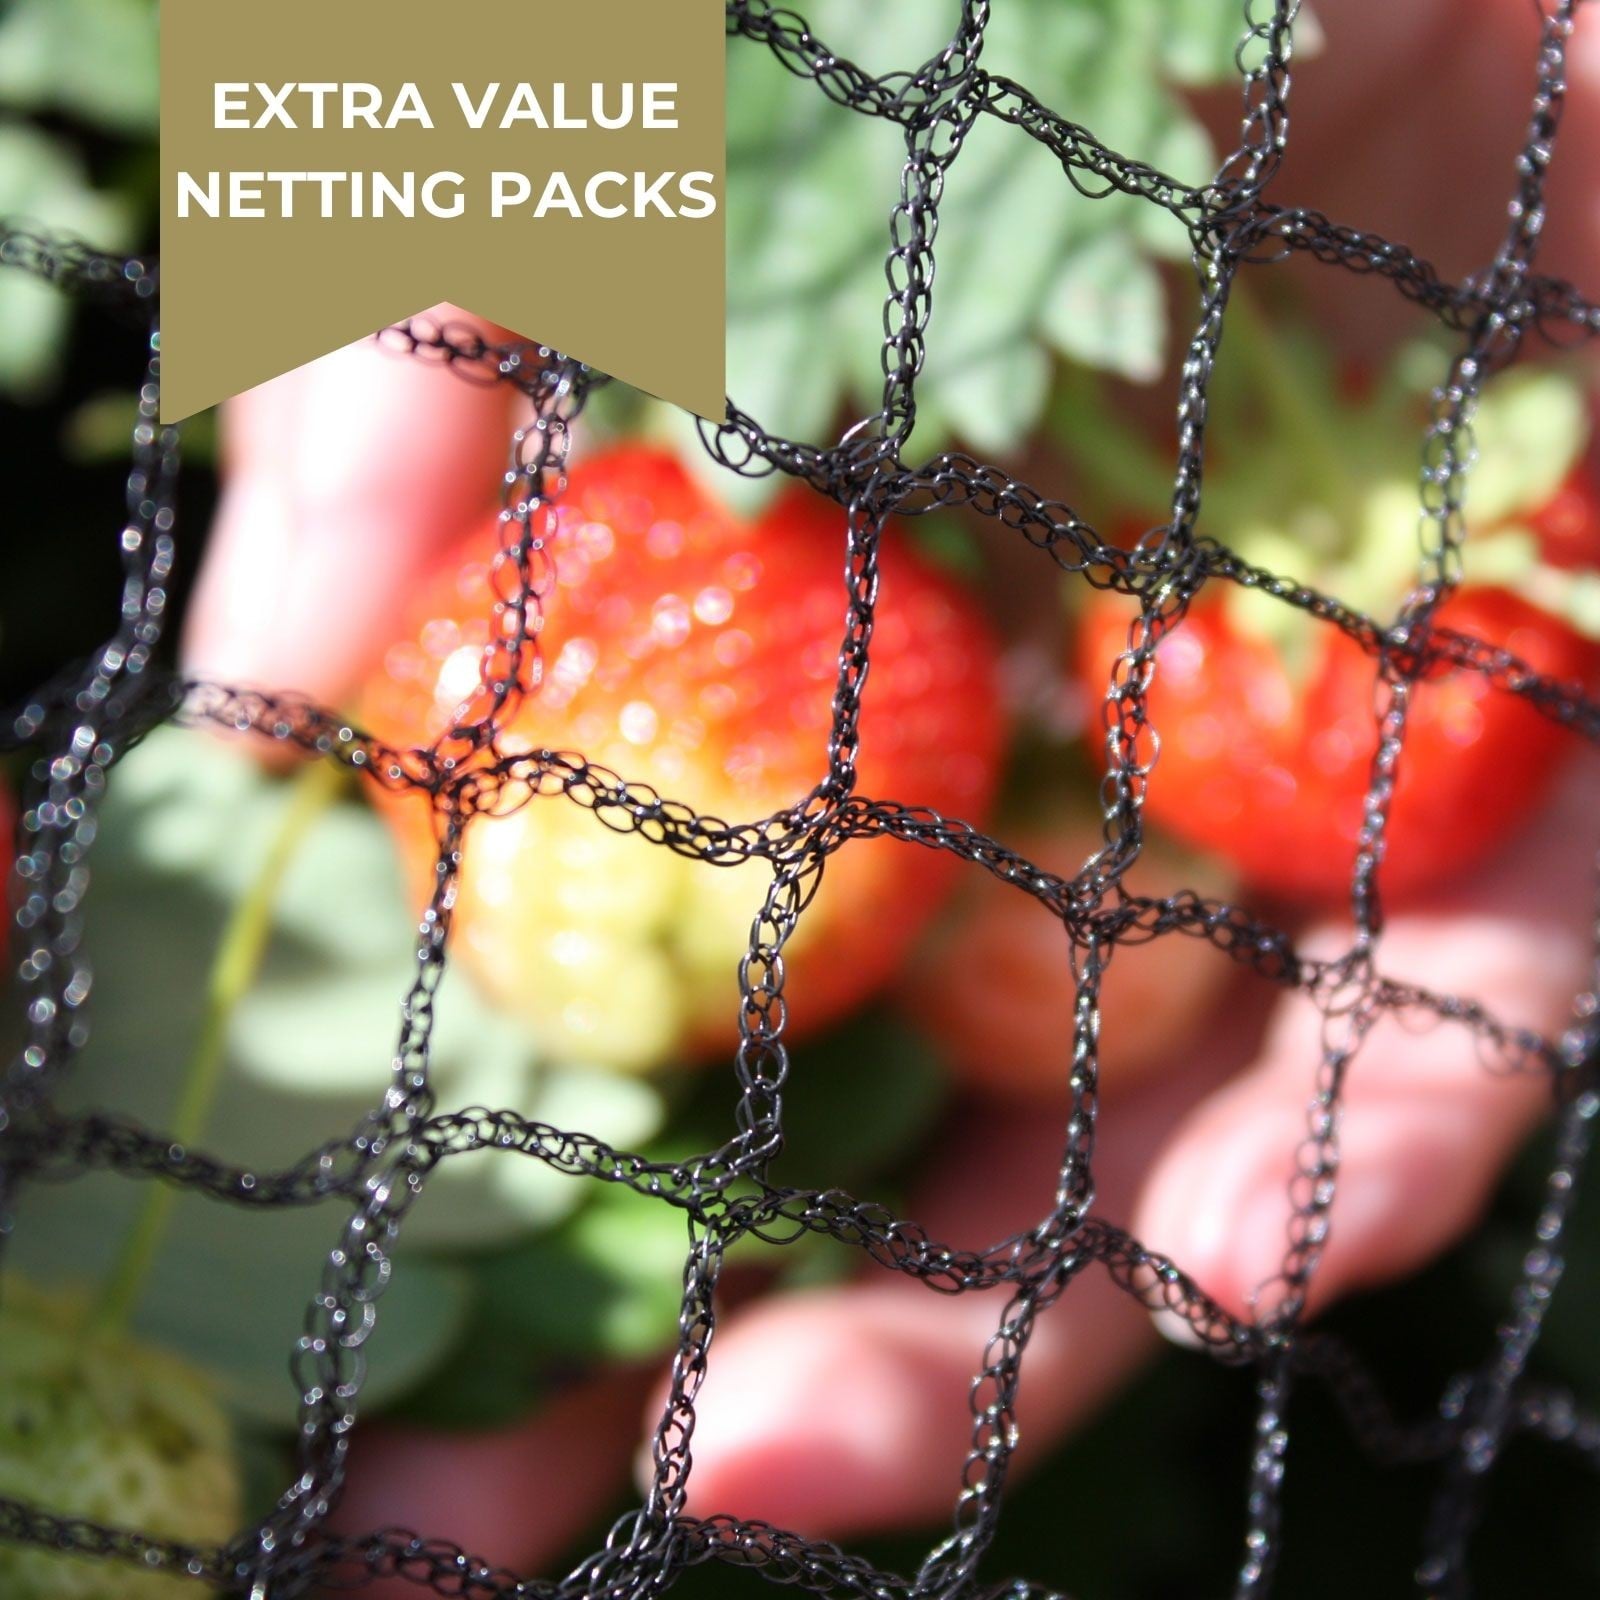 High Quality Bird Netting to Protect Your Plants - Harrod Horticultural